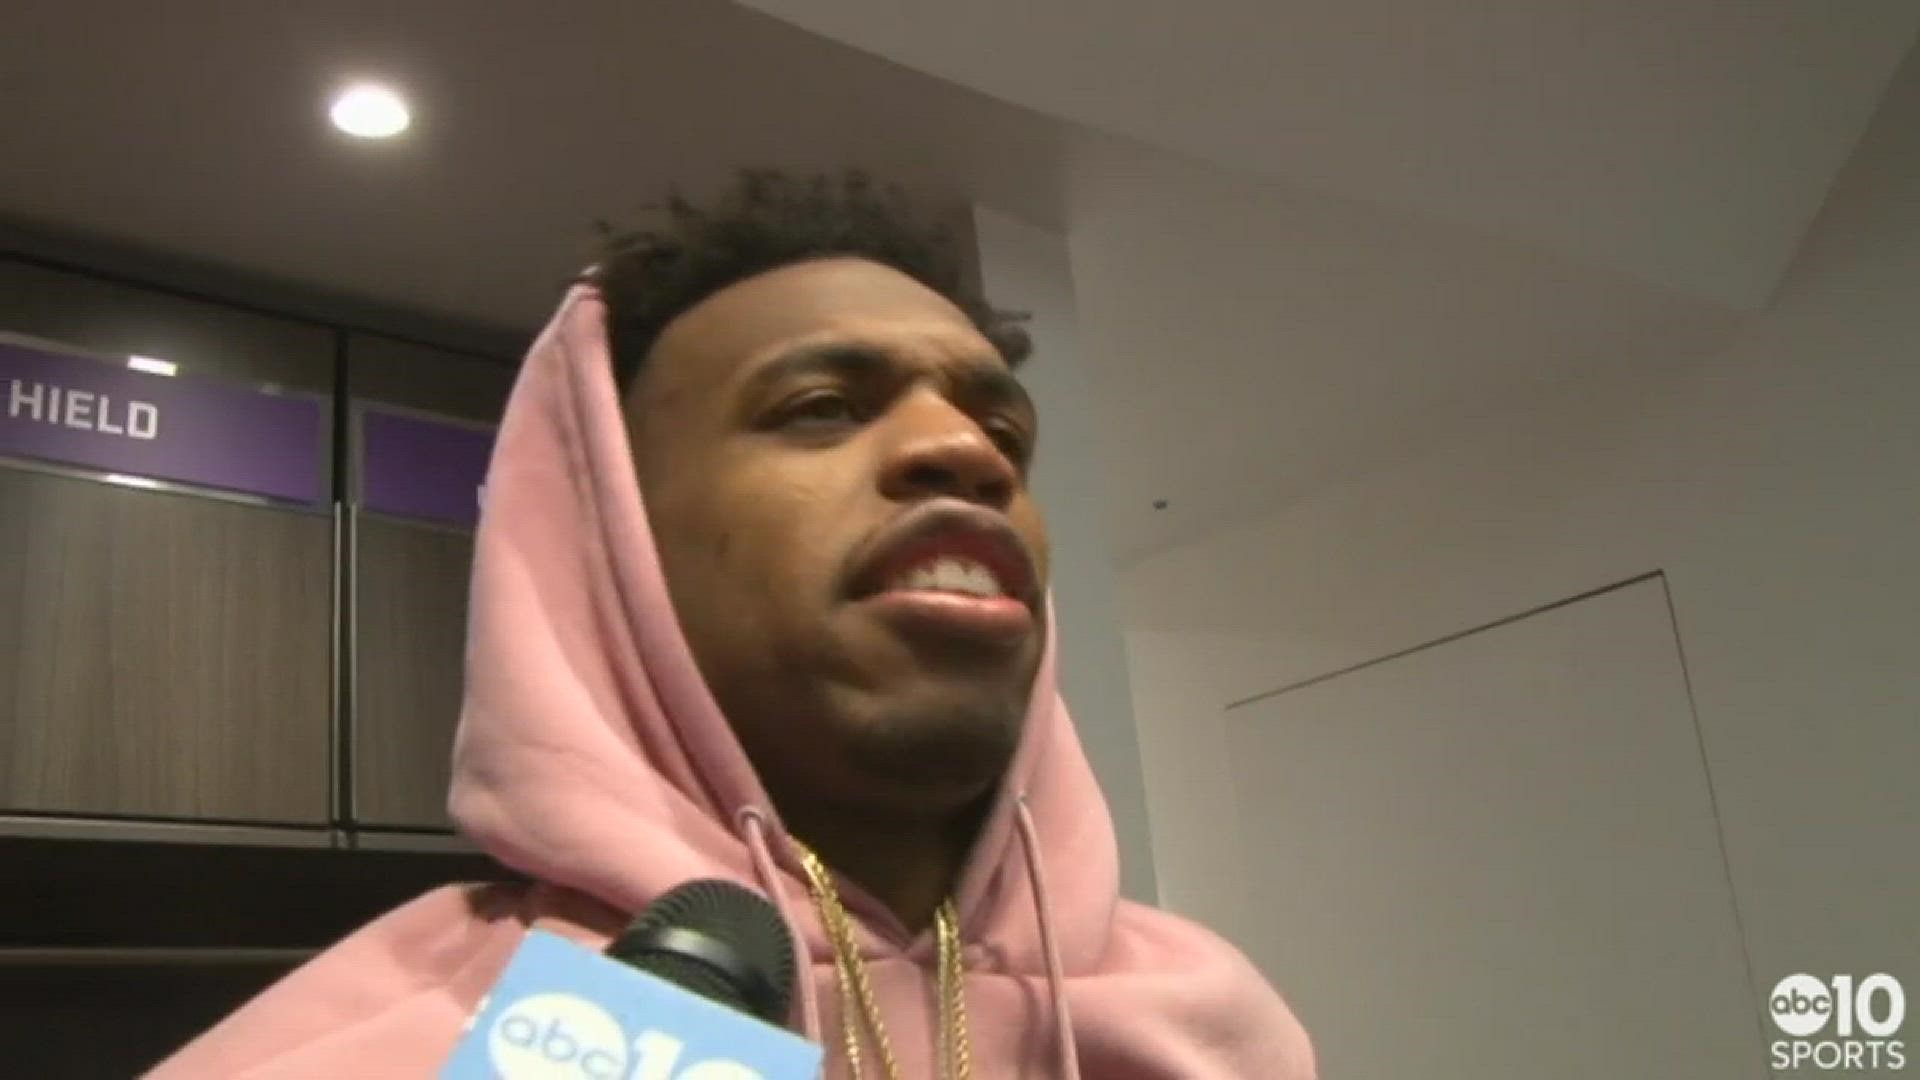 Kings guard Buddy Hield talks about Saturday's loss at home to the Los Angeles Lakers, losing two straight close games in Sacramento and his goal for his team the rest of the way.